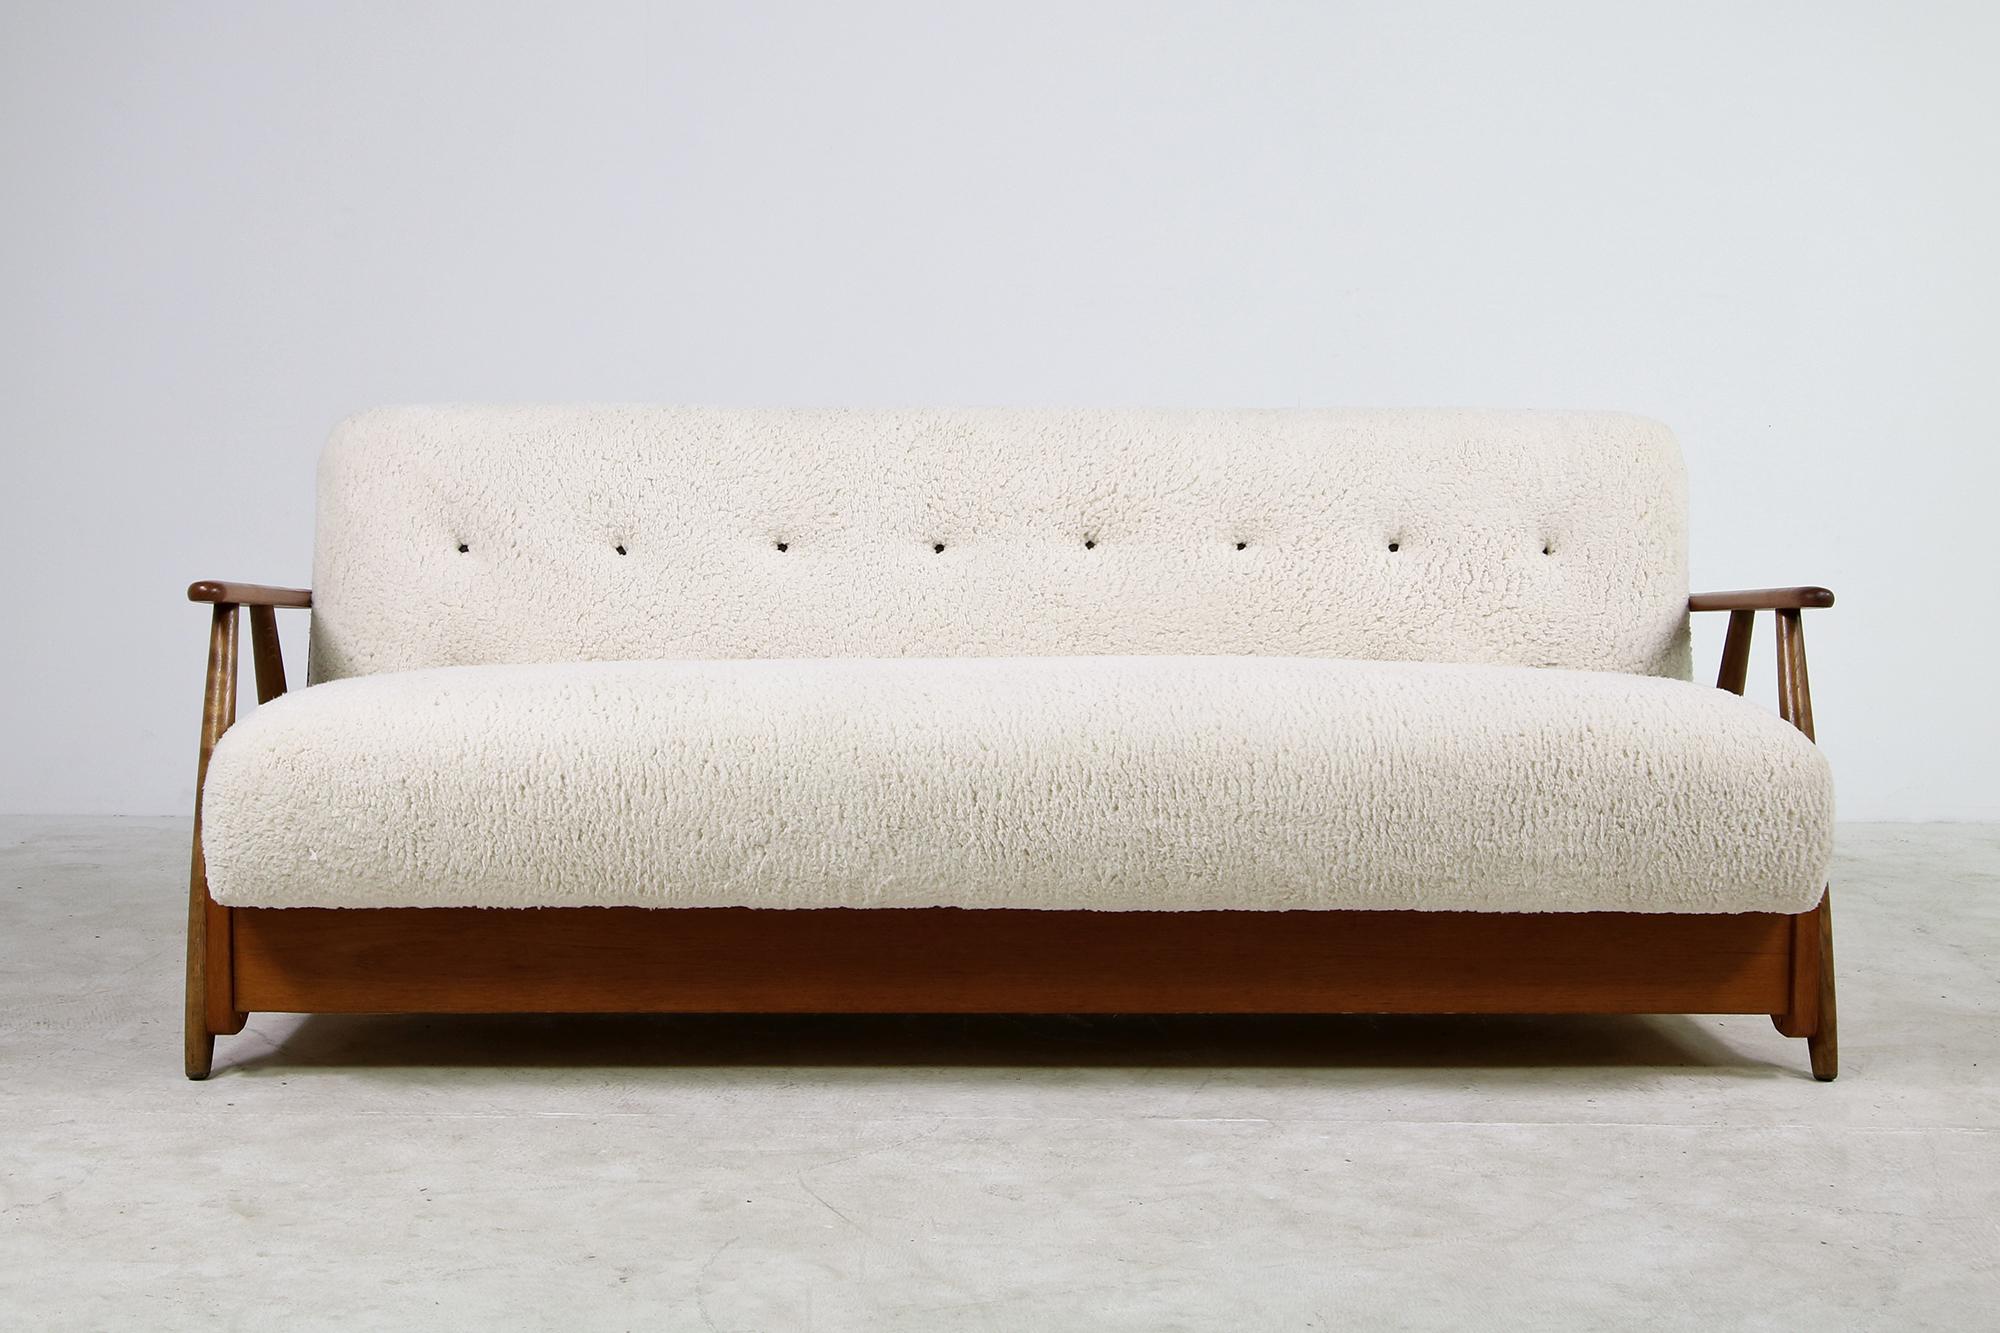 Beautiful authentic midcentury sofa. from the early 1950s made in Denmark, reupholstered, covered with great teddy fur fabric, like sheepskin, but softer to the touch, super cozy, tufted with brown leather buttons, the sofa has beechwood legs and